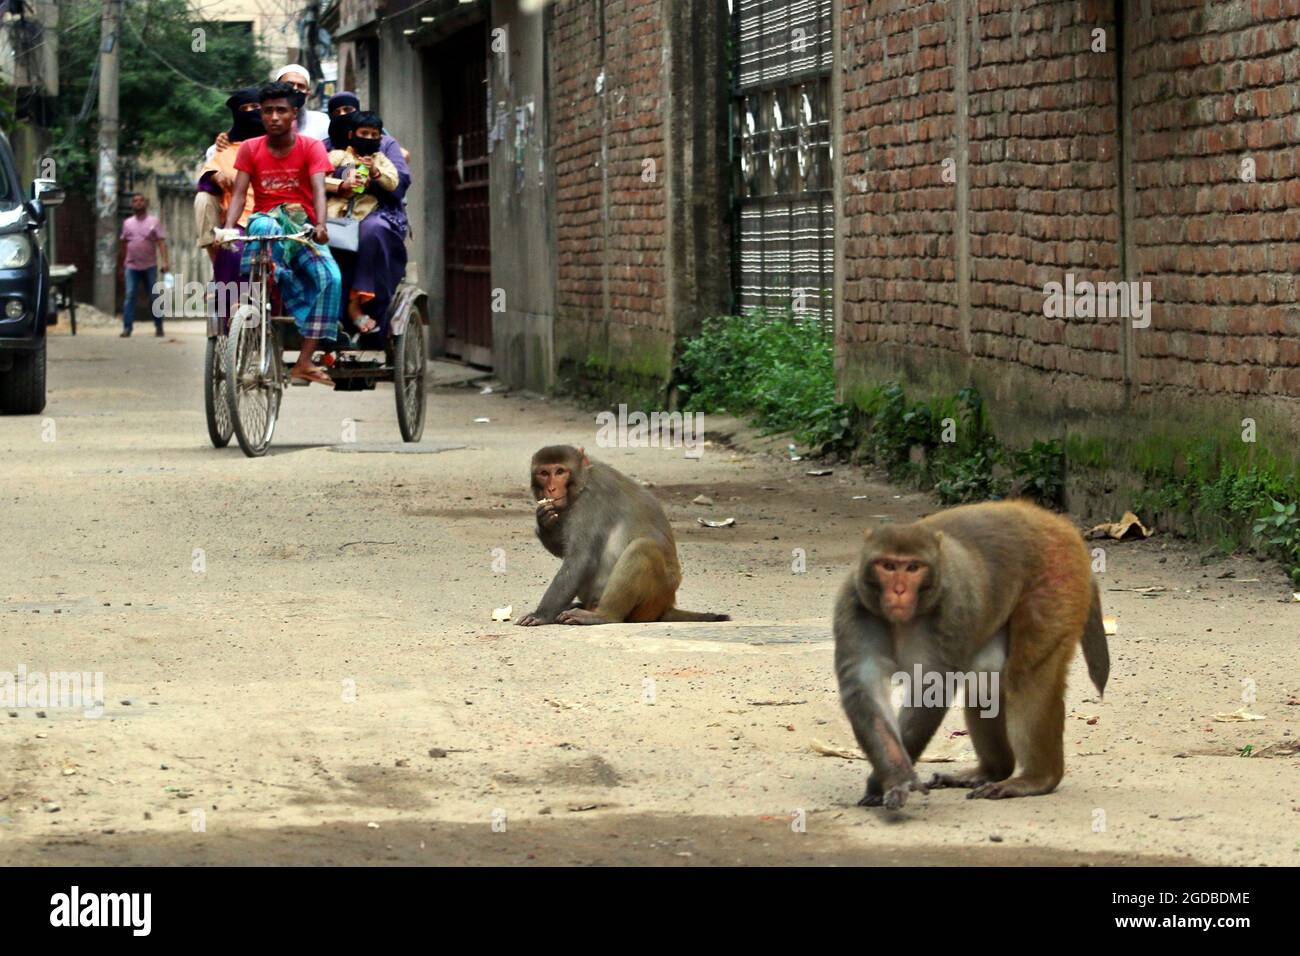 Dhaka, Bangladesh. 12th Aug, 2021. Dhaka, Bangladesh, August 12, 2021: Japanese macaques are seen on the fences of the houses of Gandaria neighborhood looking for tourist to receive food amid Covid-19 pandemic. The Japanese macaque or red-faced macaque is a species of primate, that lives in forests and mountains, that have migrated to cities and live with humans in looking for food. Credit: Habibur Rahman/Eyepix Group/Alamy Live News Credit: Eyepix Group/Alamy Live News Stock Photo